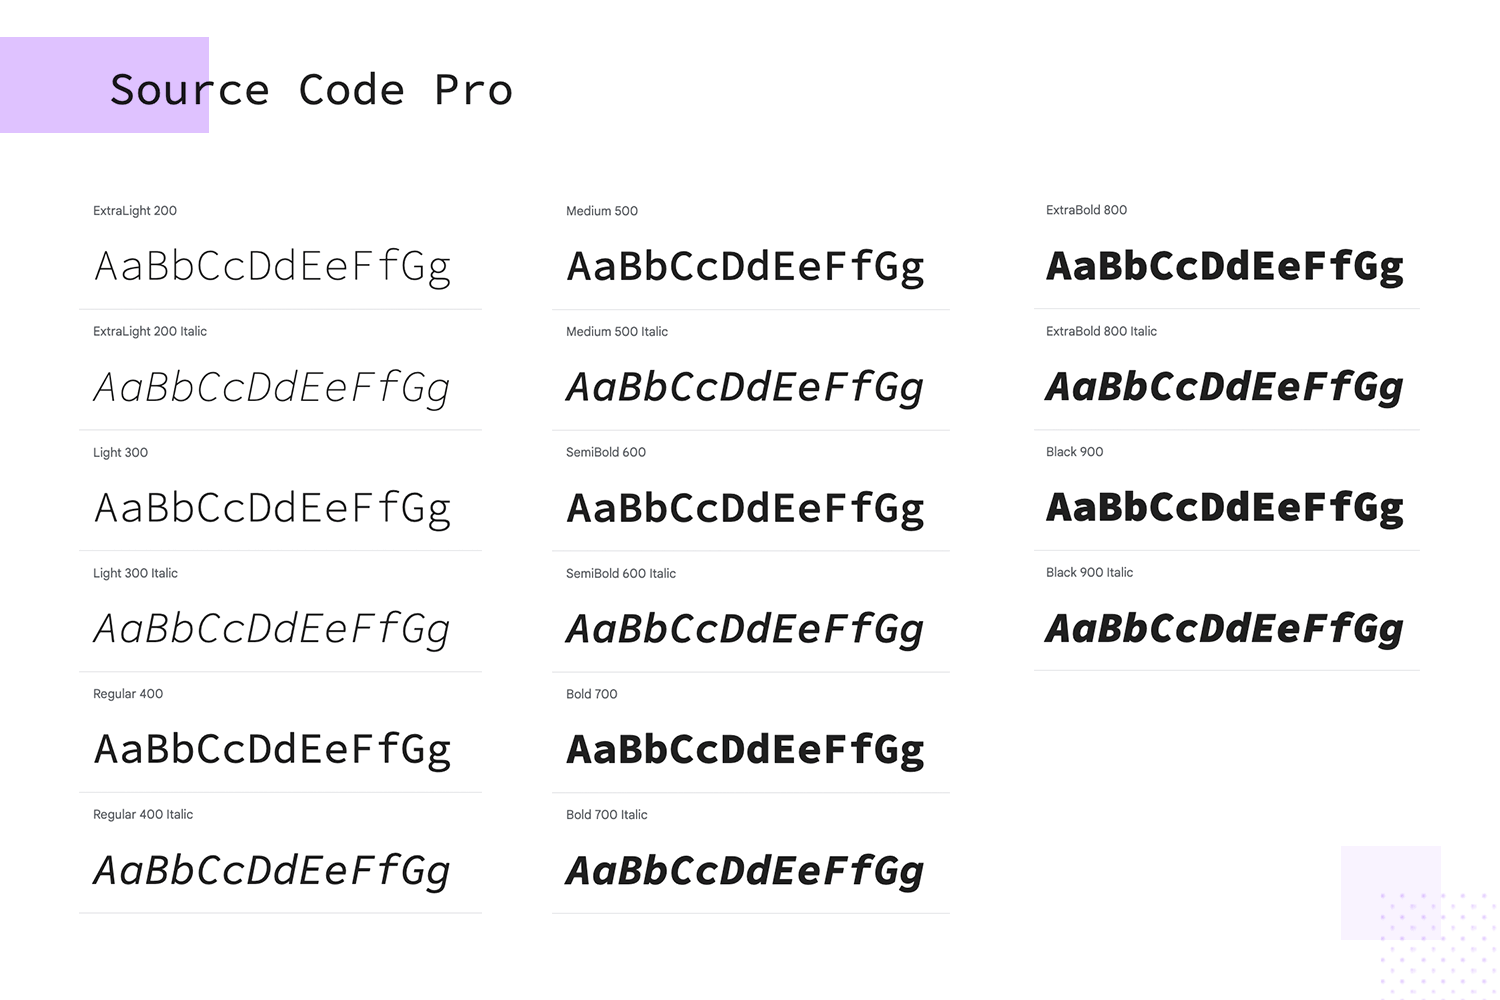 Source Code Pro font showcase with weights from ExtraLight 200 to Black 900, including italics